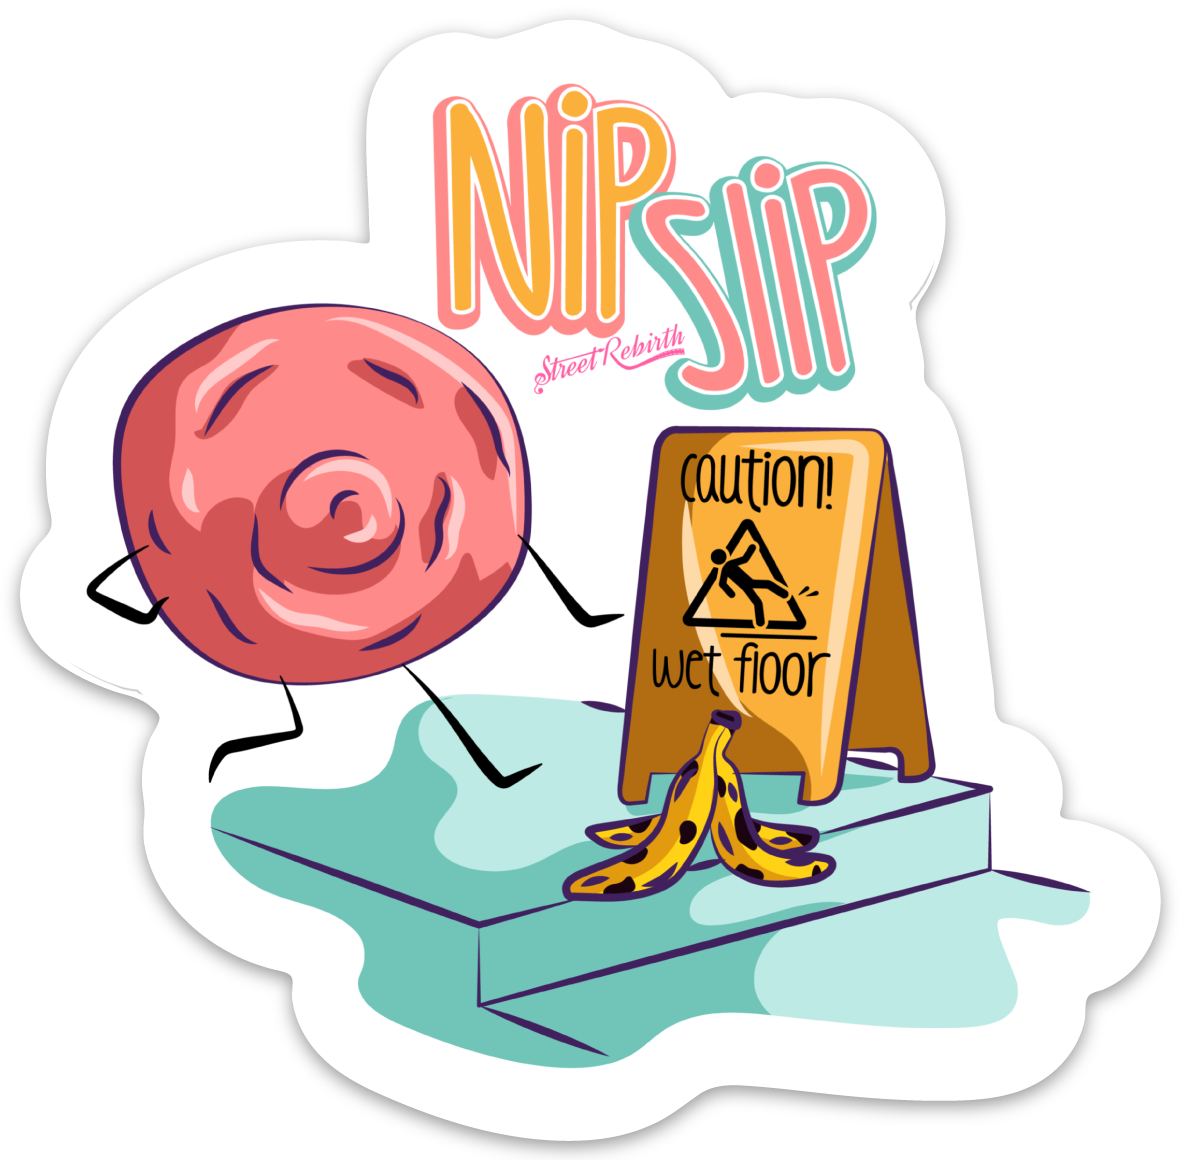 Nip Slip PUN STICKER – ONE 4 INCH WATER PROOF VINYL STICKER – FOR HYDRO FLASK, SKATEBOARD, LAPTOP, PLANNER, CAR, COLLECTING, GIFTING